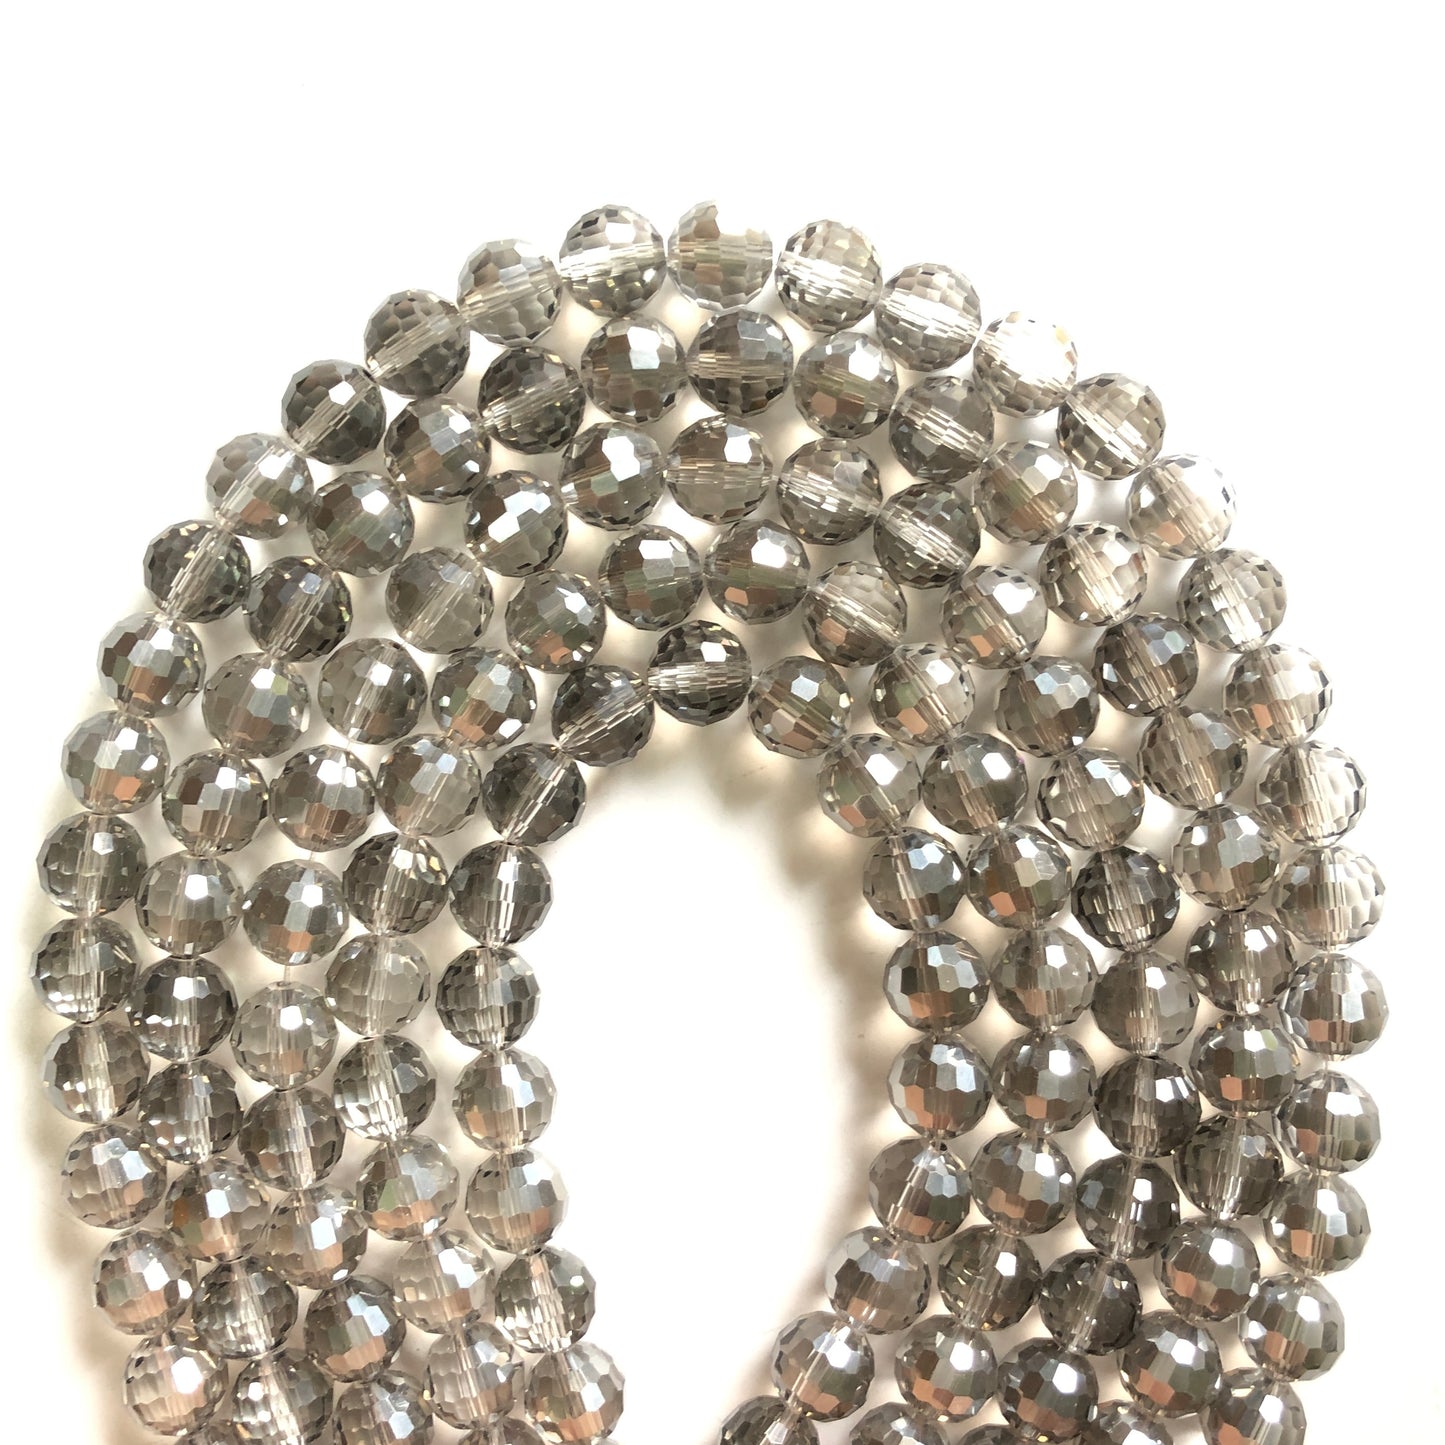 2 Strands/lot 10mm Clear Gray 96 Faceted Glass Beads Glass Beads Faceted Glass Beads Charms Beads Beyond